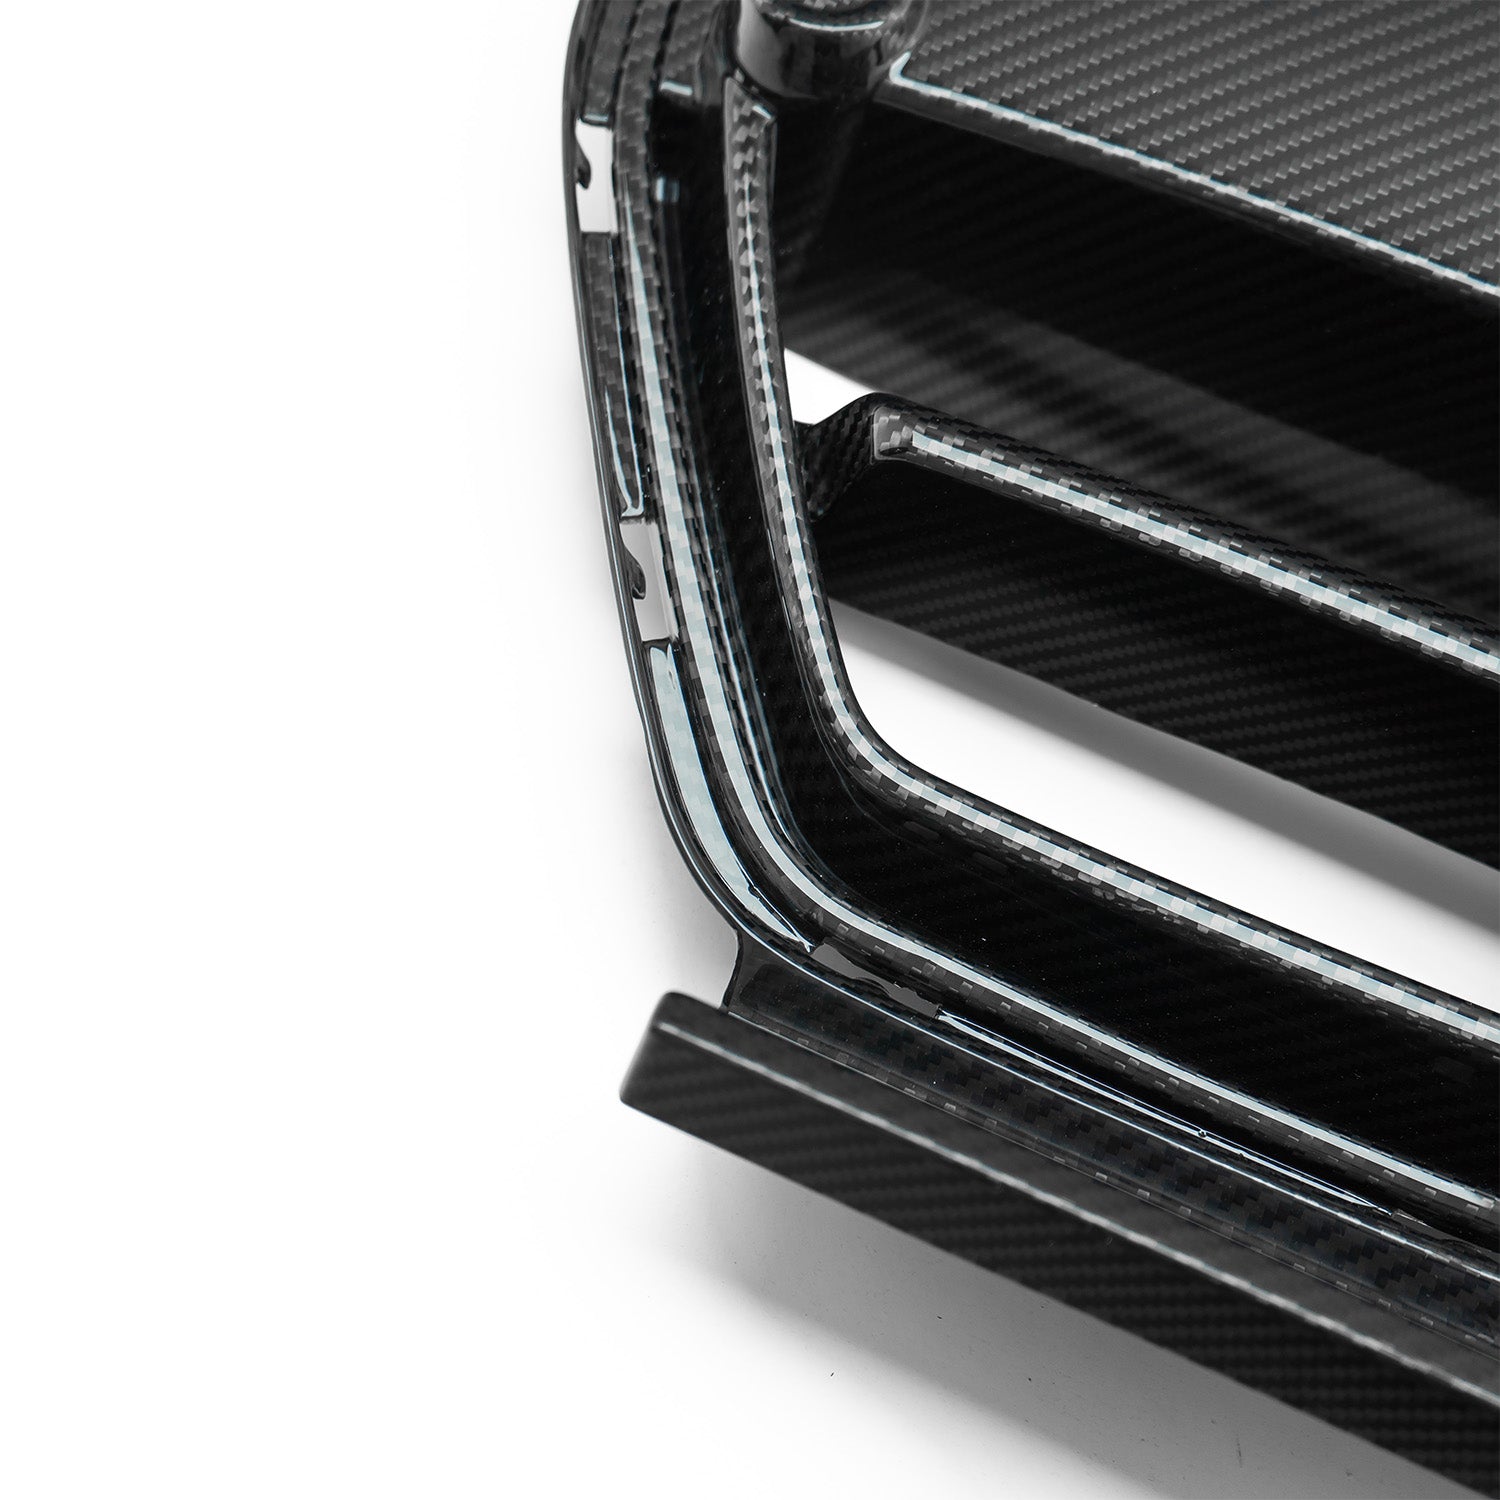 SooQoo SQ Aero Carbon Front Grille For BMW G80 M3 & G82 M4 R44 Performance